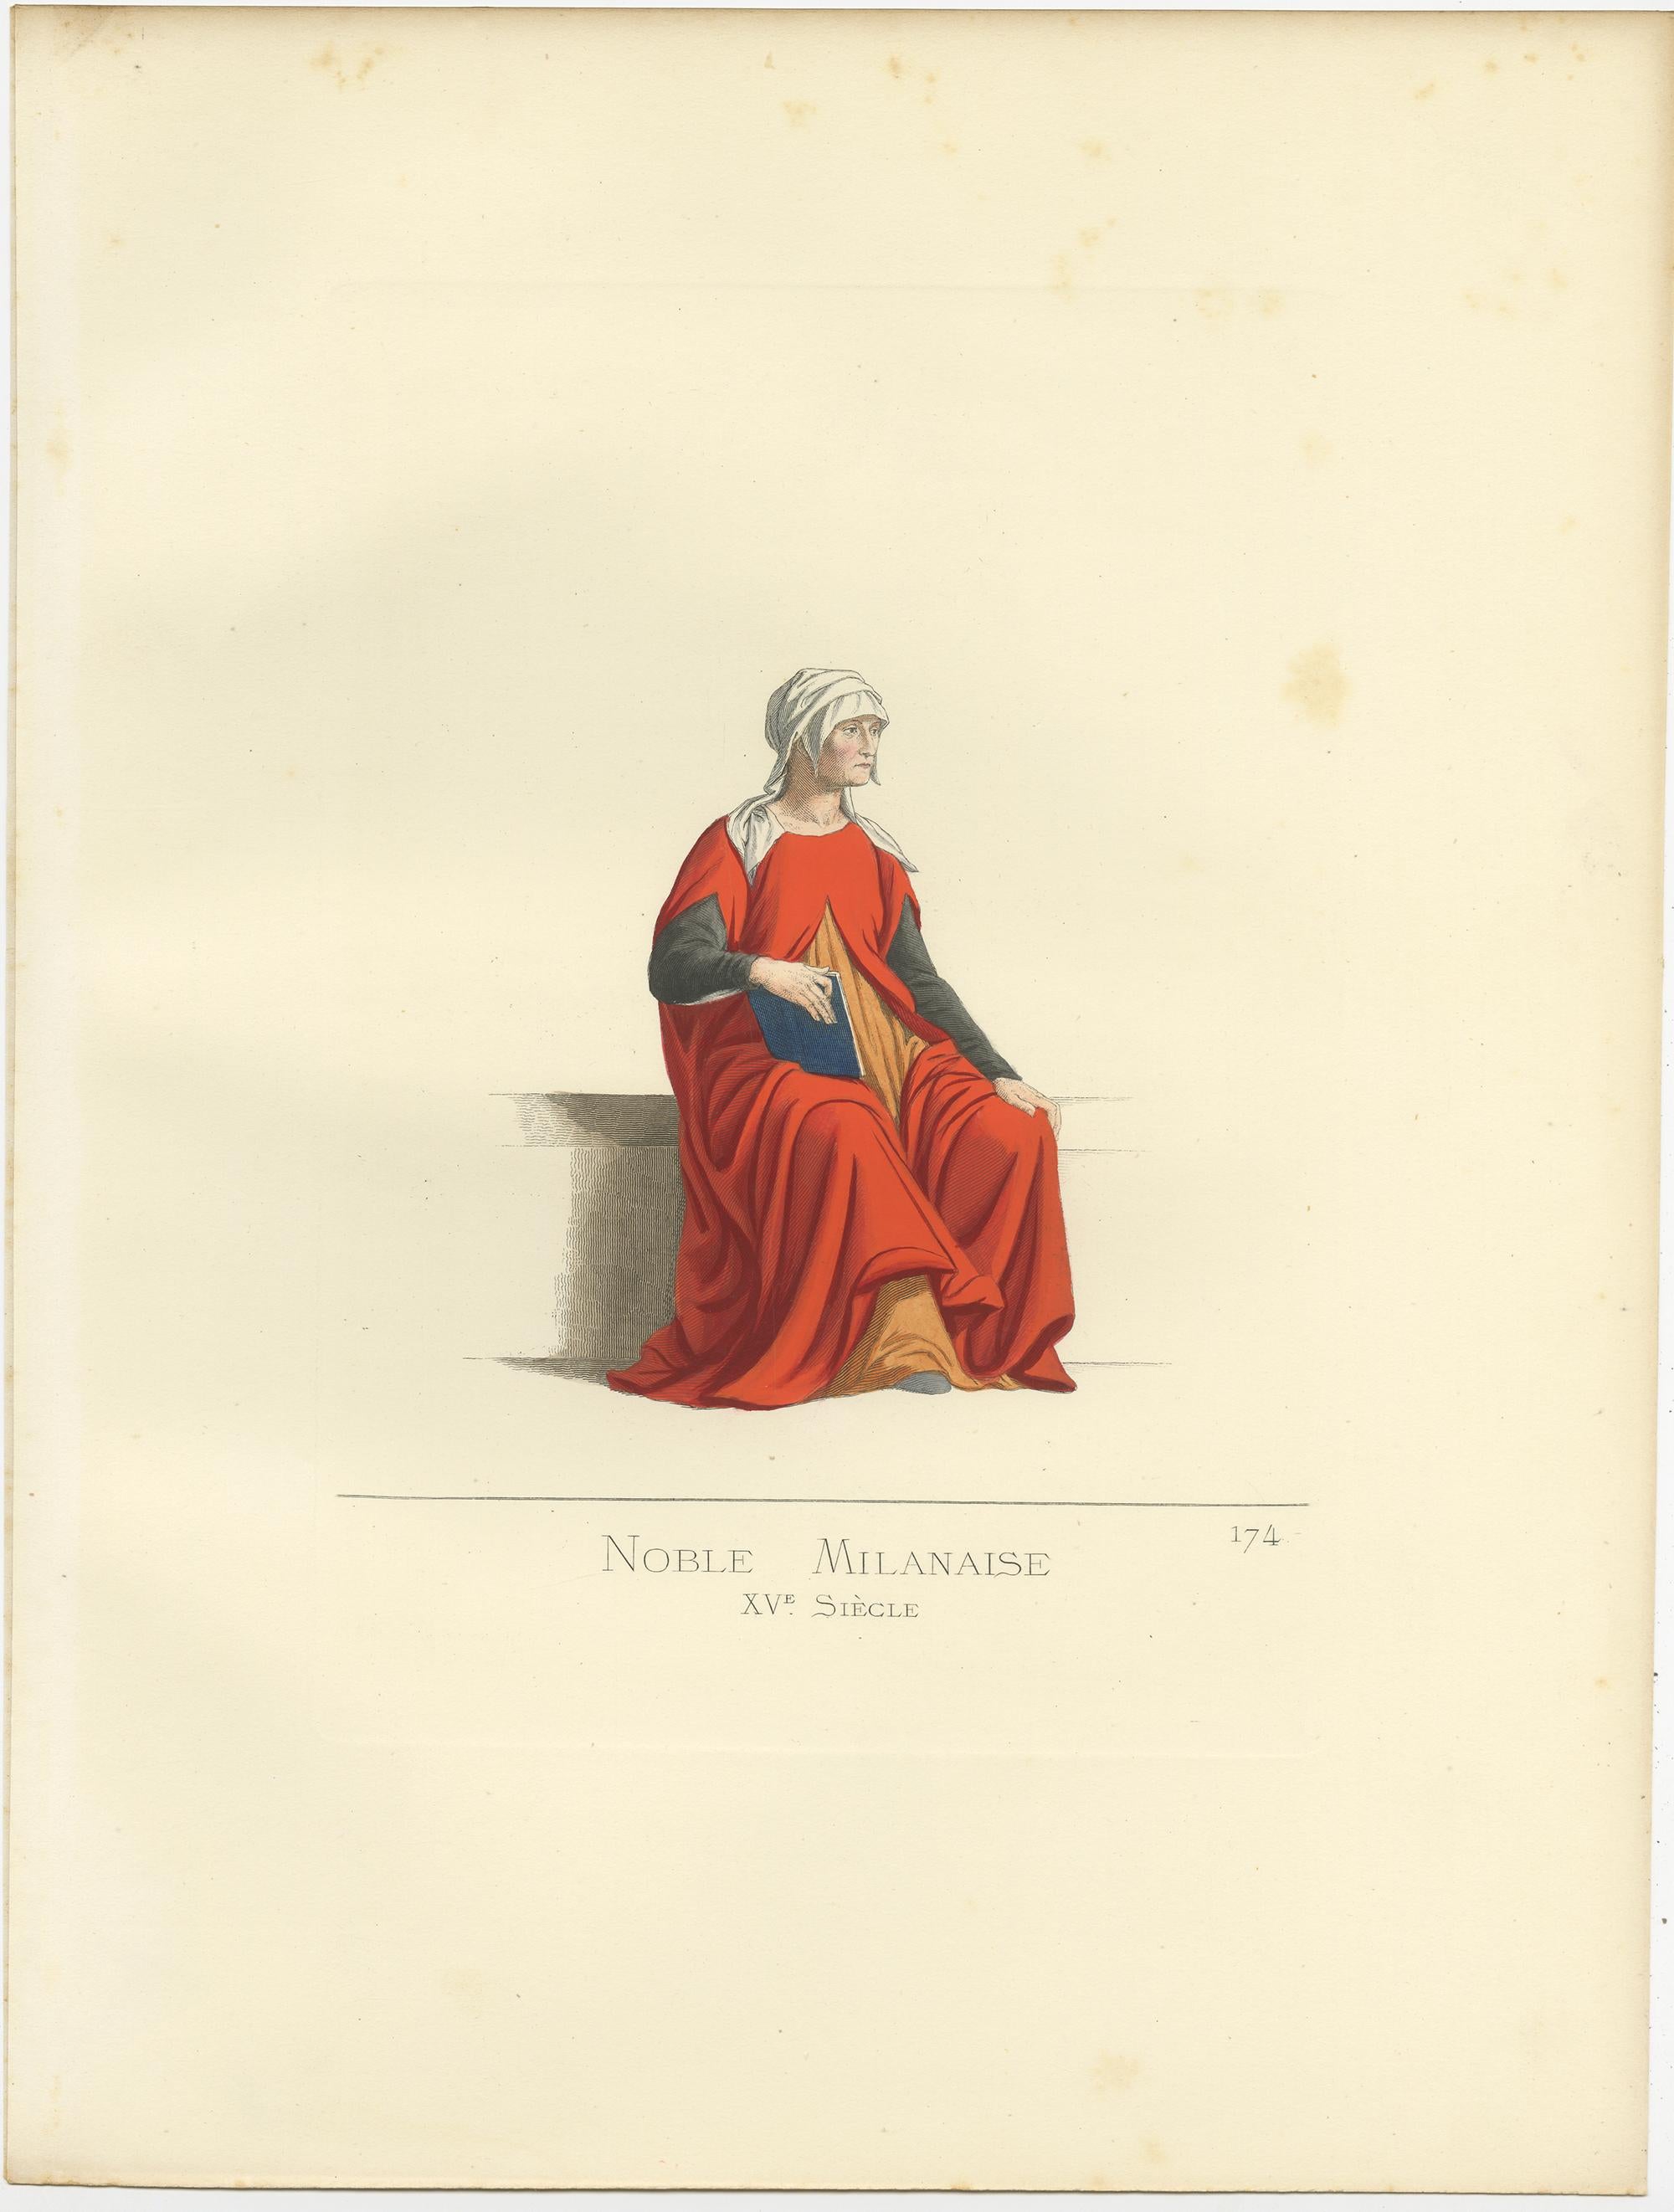 Antique print titled ‘Noble Milanaise, XVe Siecle.’ Original antique print of a noblewoman from Milan, Italy 15th century. This print originates from 'Costumes historiques de femmes du XIII, XIV et XV siècle' by C. Bonnard. Published 1860.